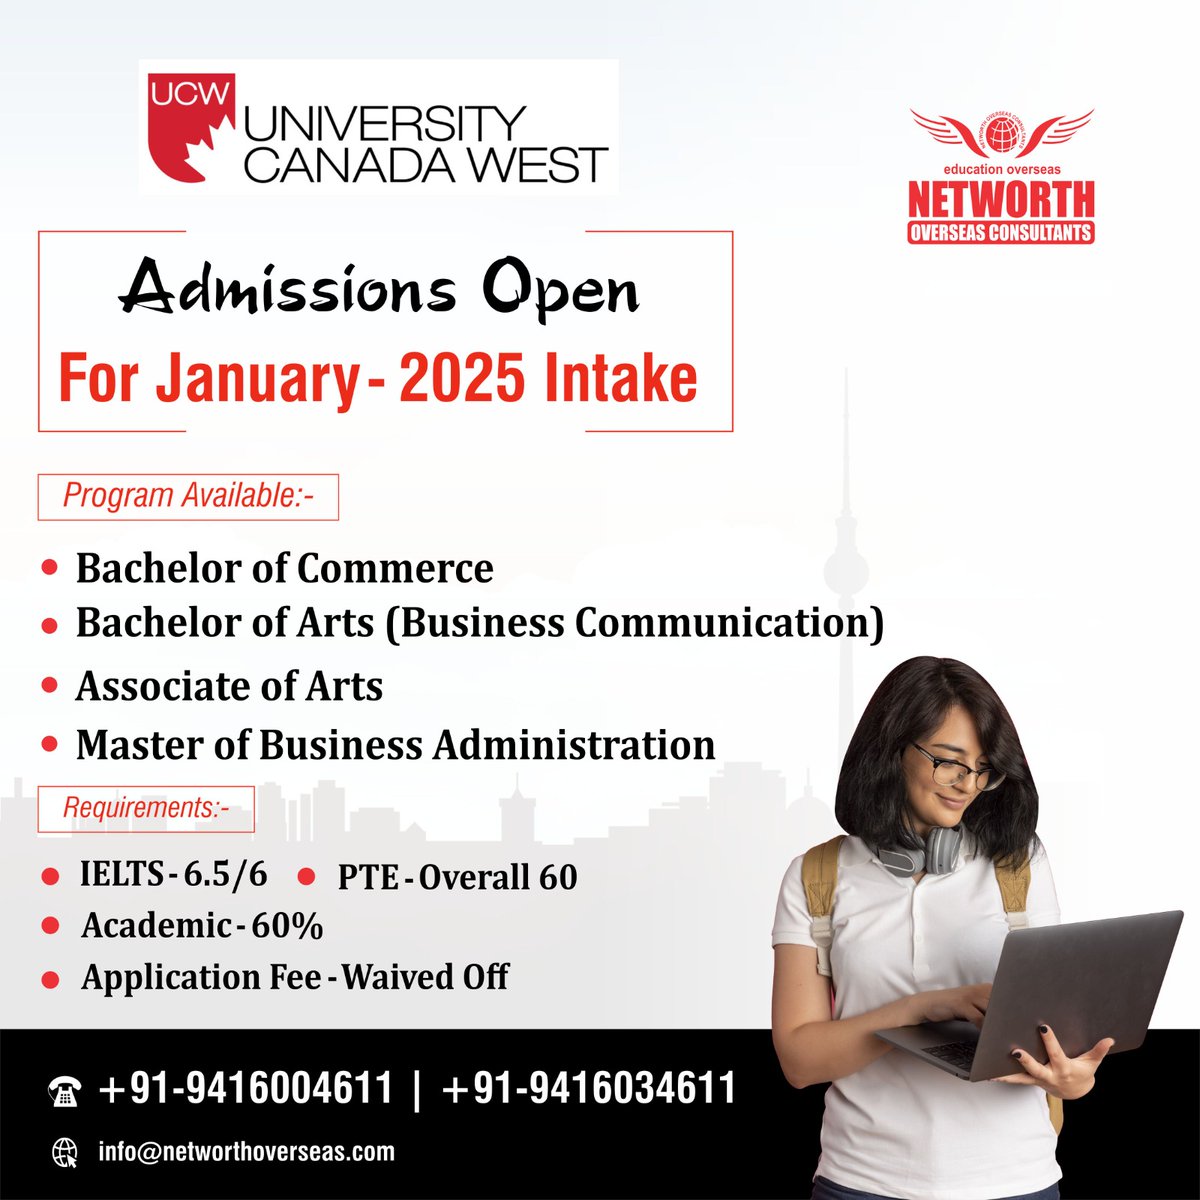 🇨🇦 🇨🇦🍁 Study in Canada 🇨🇦 🇨🇦 🍁

❗️University Canada West Admissions Open For January 2025 Intake ❗️
 instagram.com/networthimmigr…
.
.
#networthimmigrationsolutions #Canada #CanadaVisa #ImmigrationConsultant #ImmigrationExpert #Visaconsultant #MovetoCanada #ImmigratetoCanada